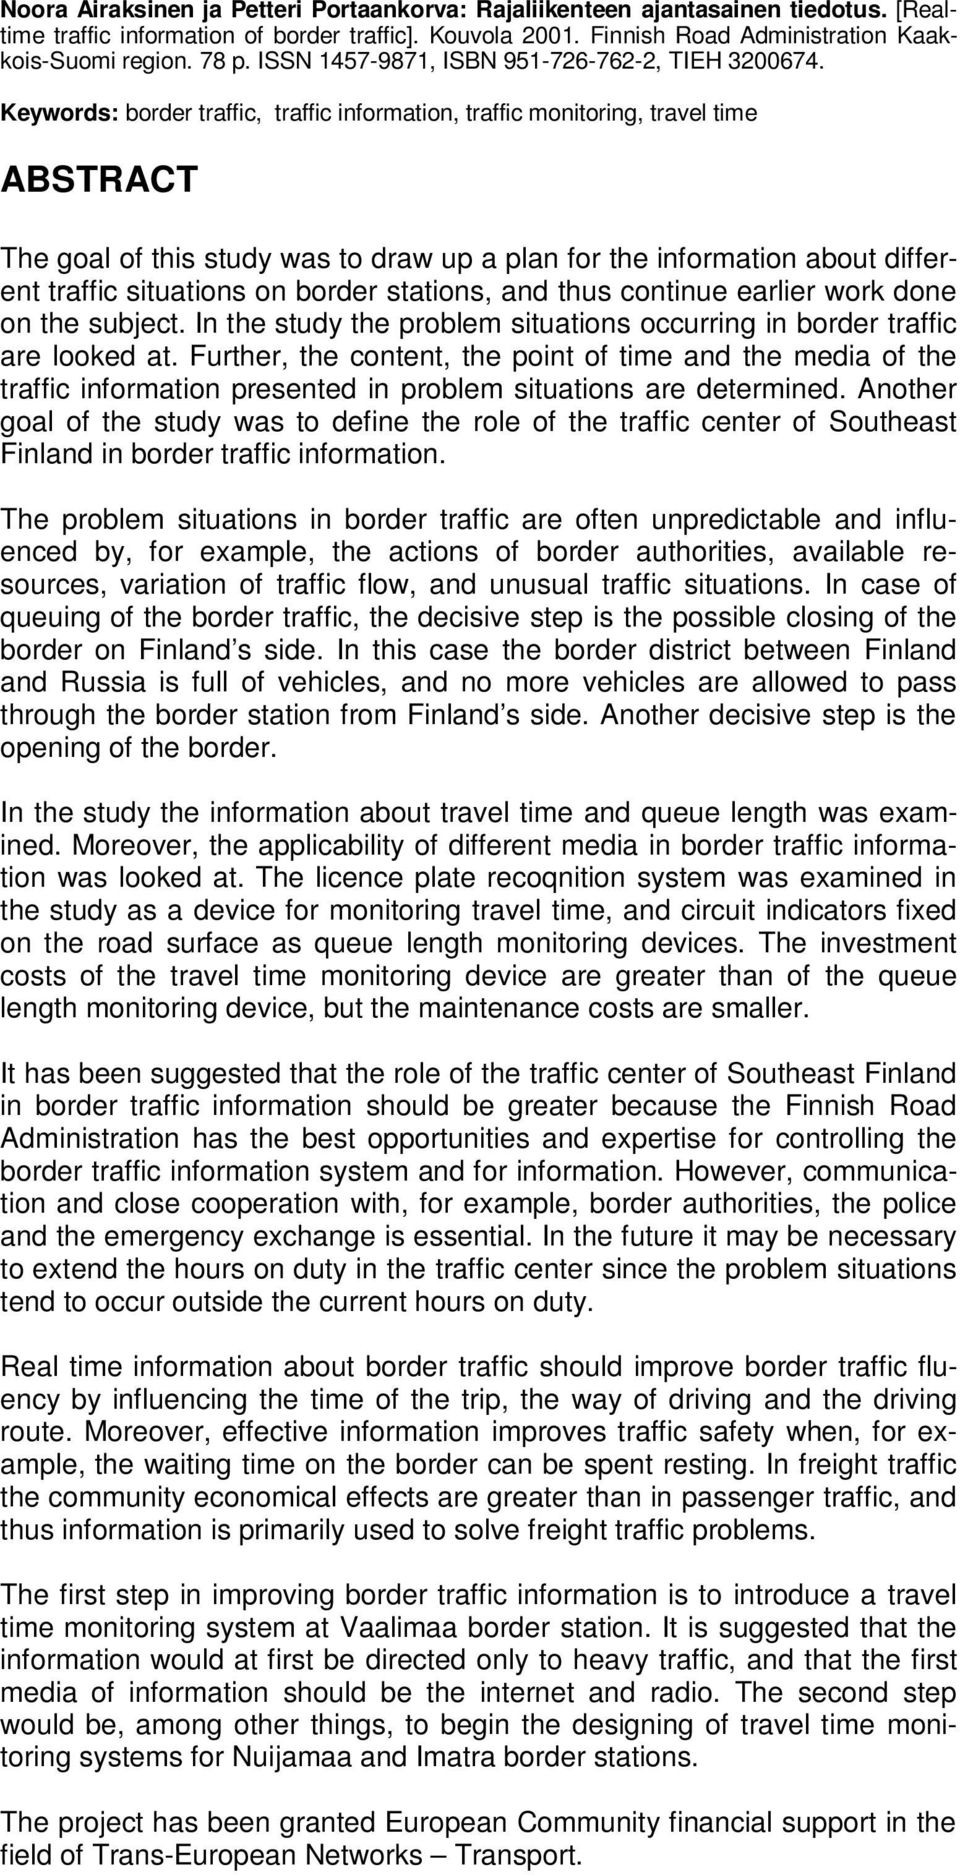 Keywords: border traffic, traffic information, traffic monitoring, travel time ABSTRACT The goal of this study was to draw up a plan for the information about different traffic situations on border